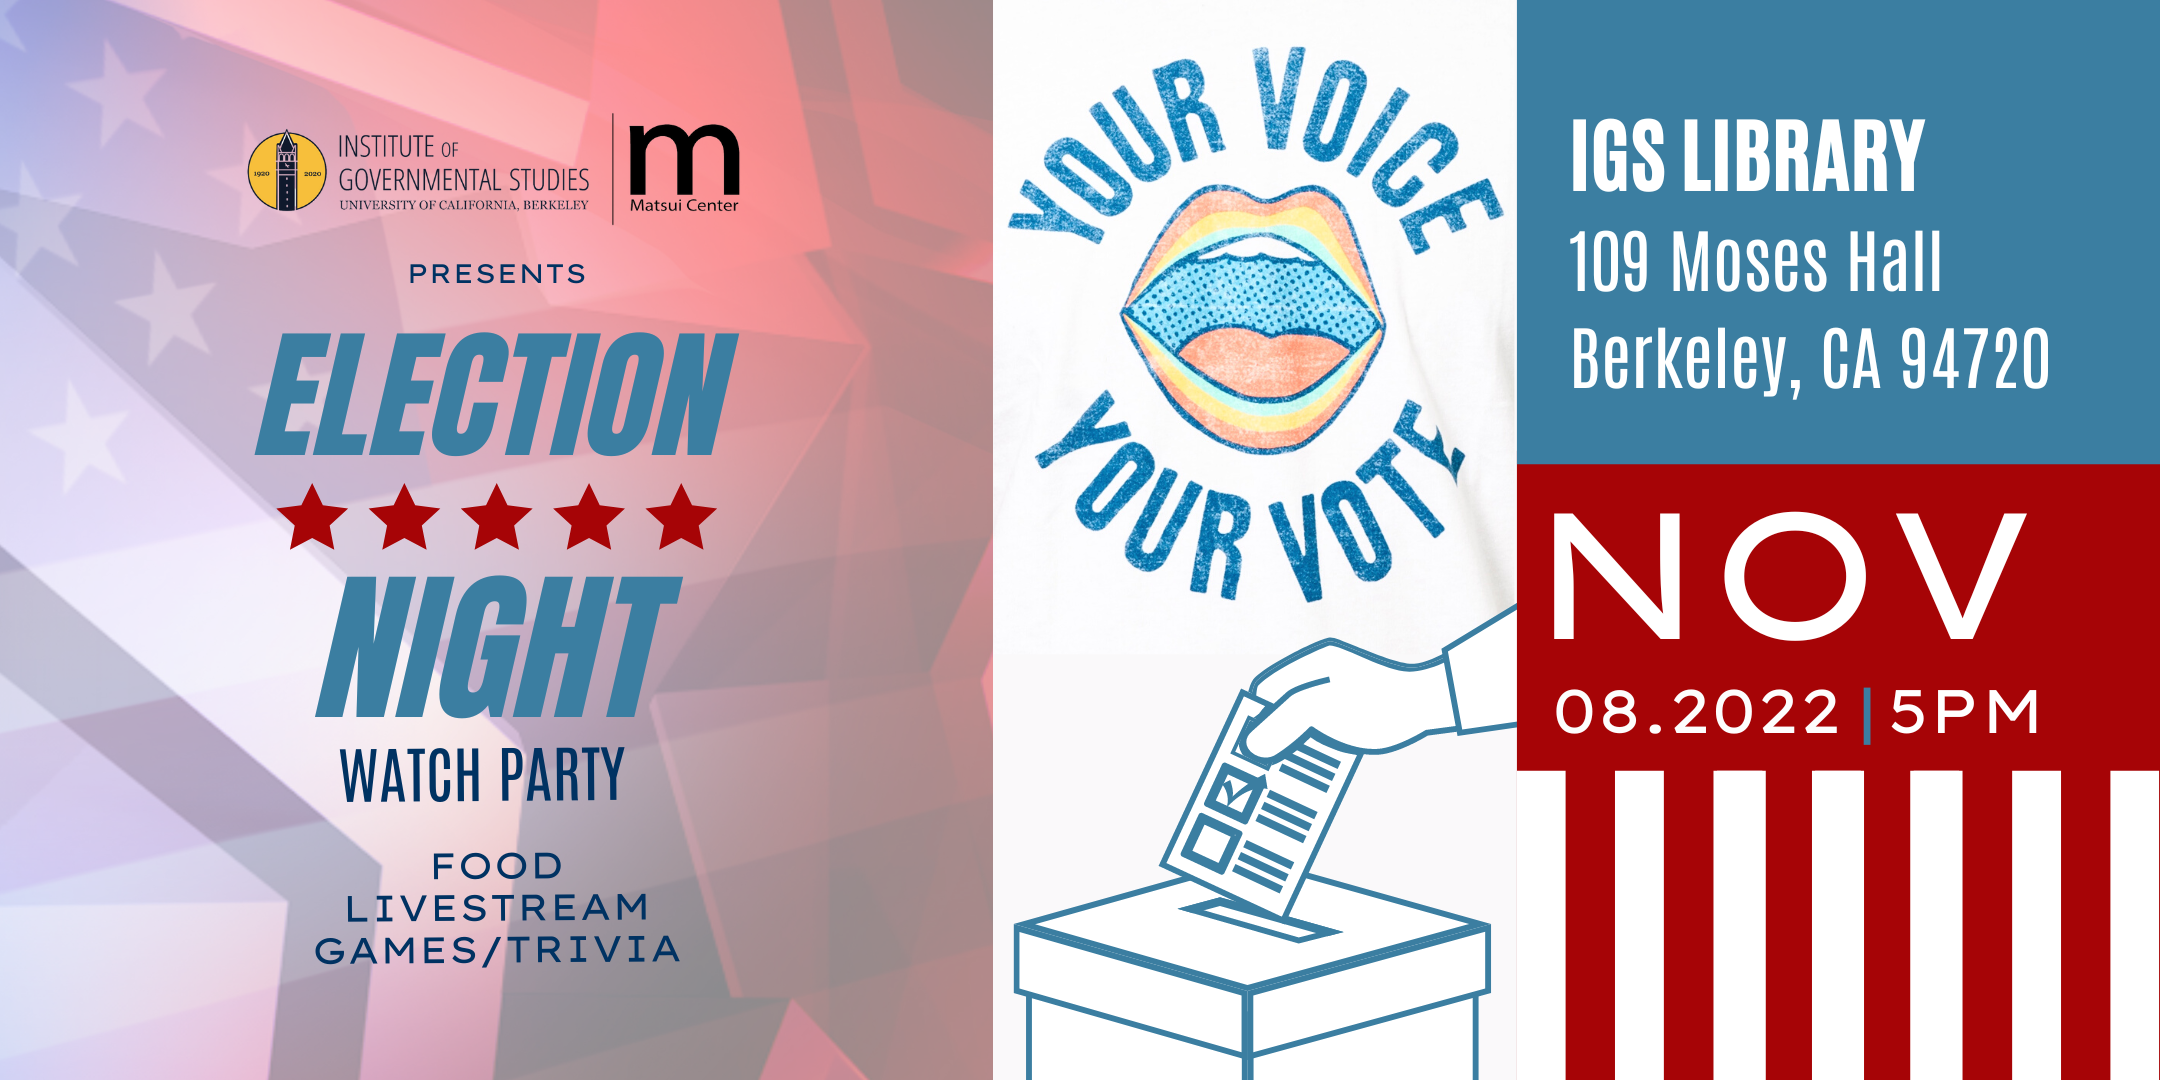 11-8-22 Election Night at IGS 2022 Midterm Election Watch Party Your Voice Your Vote